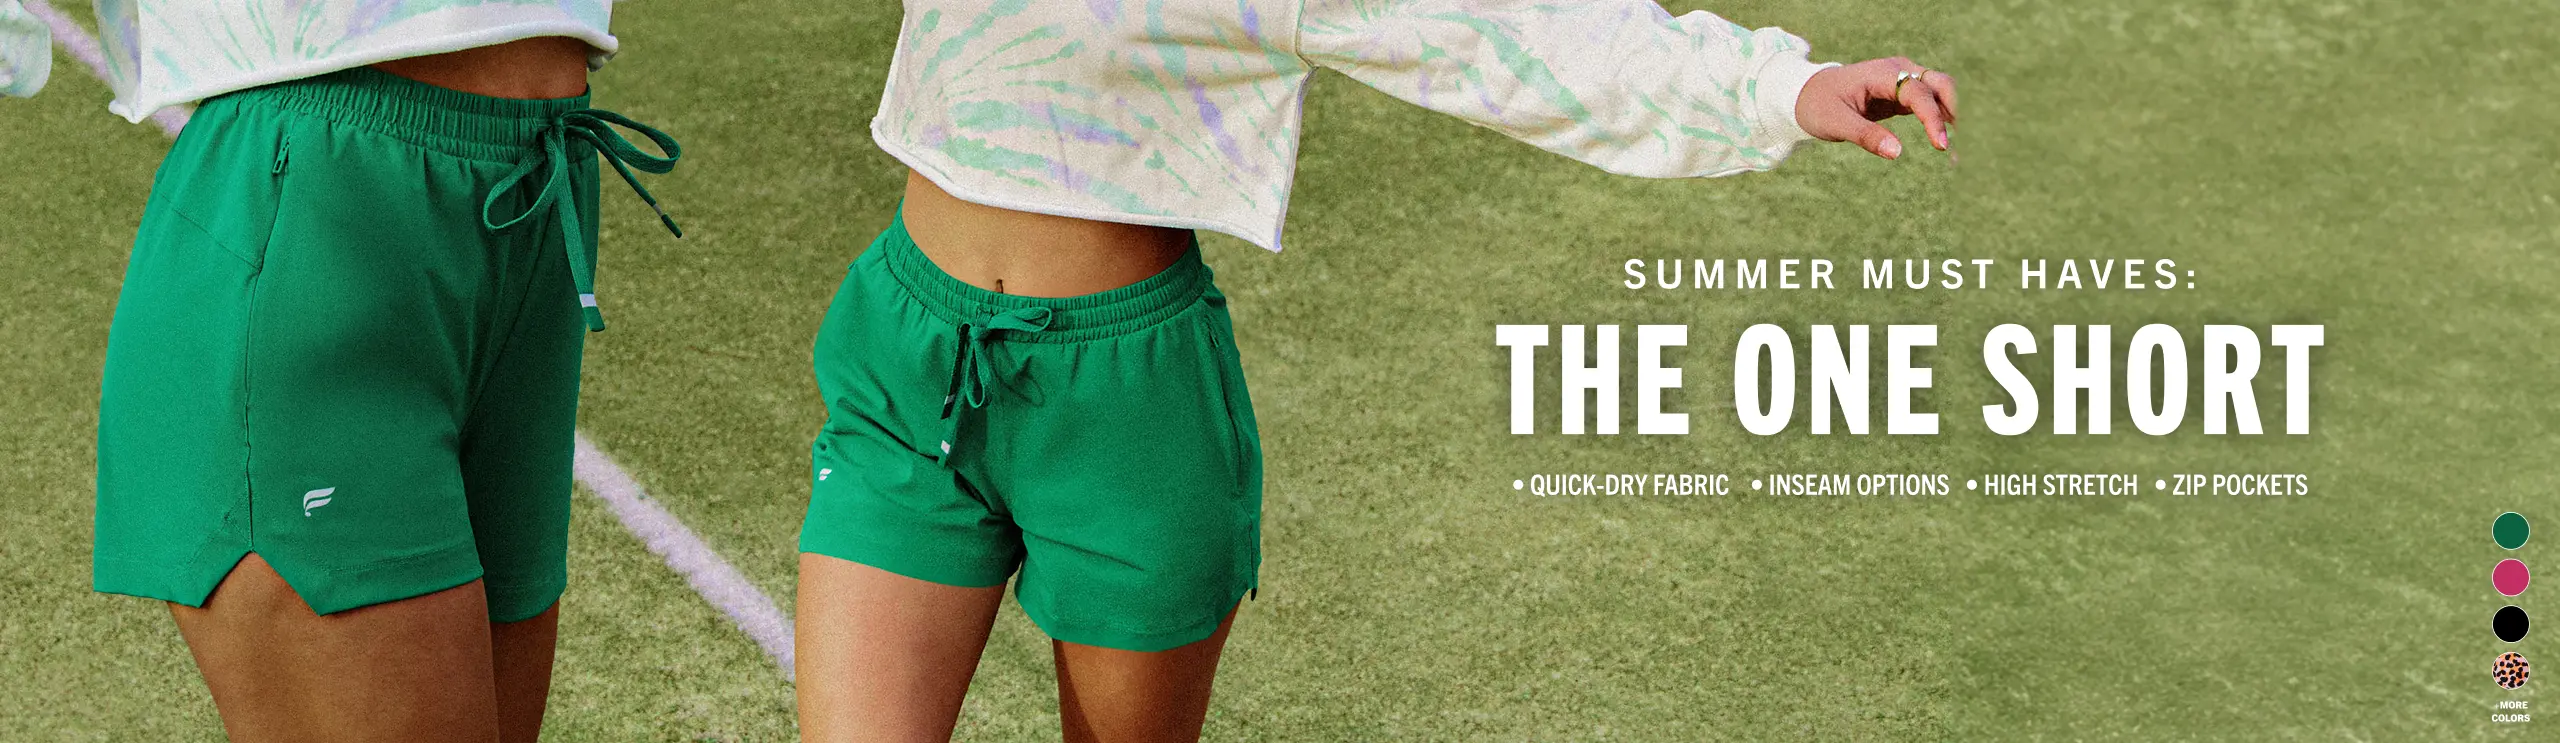 Summer must haves: The One Short. Click to shop.